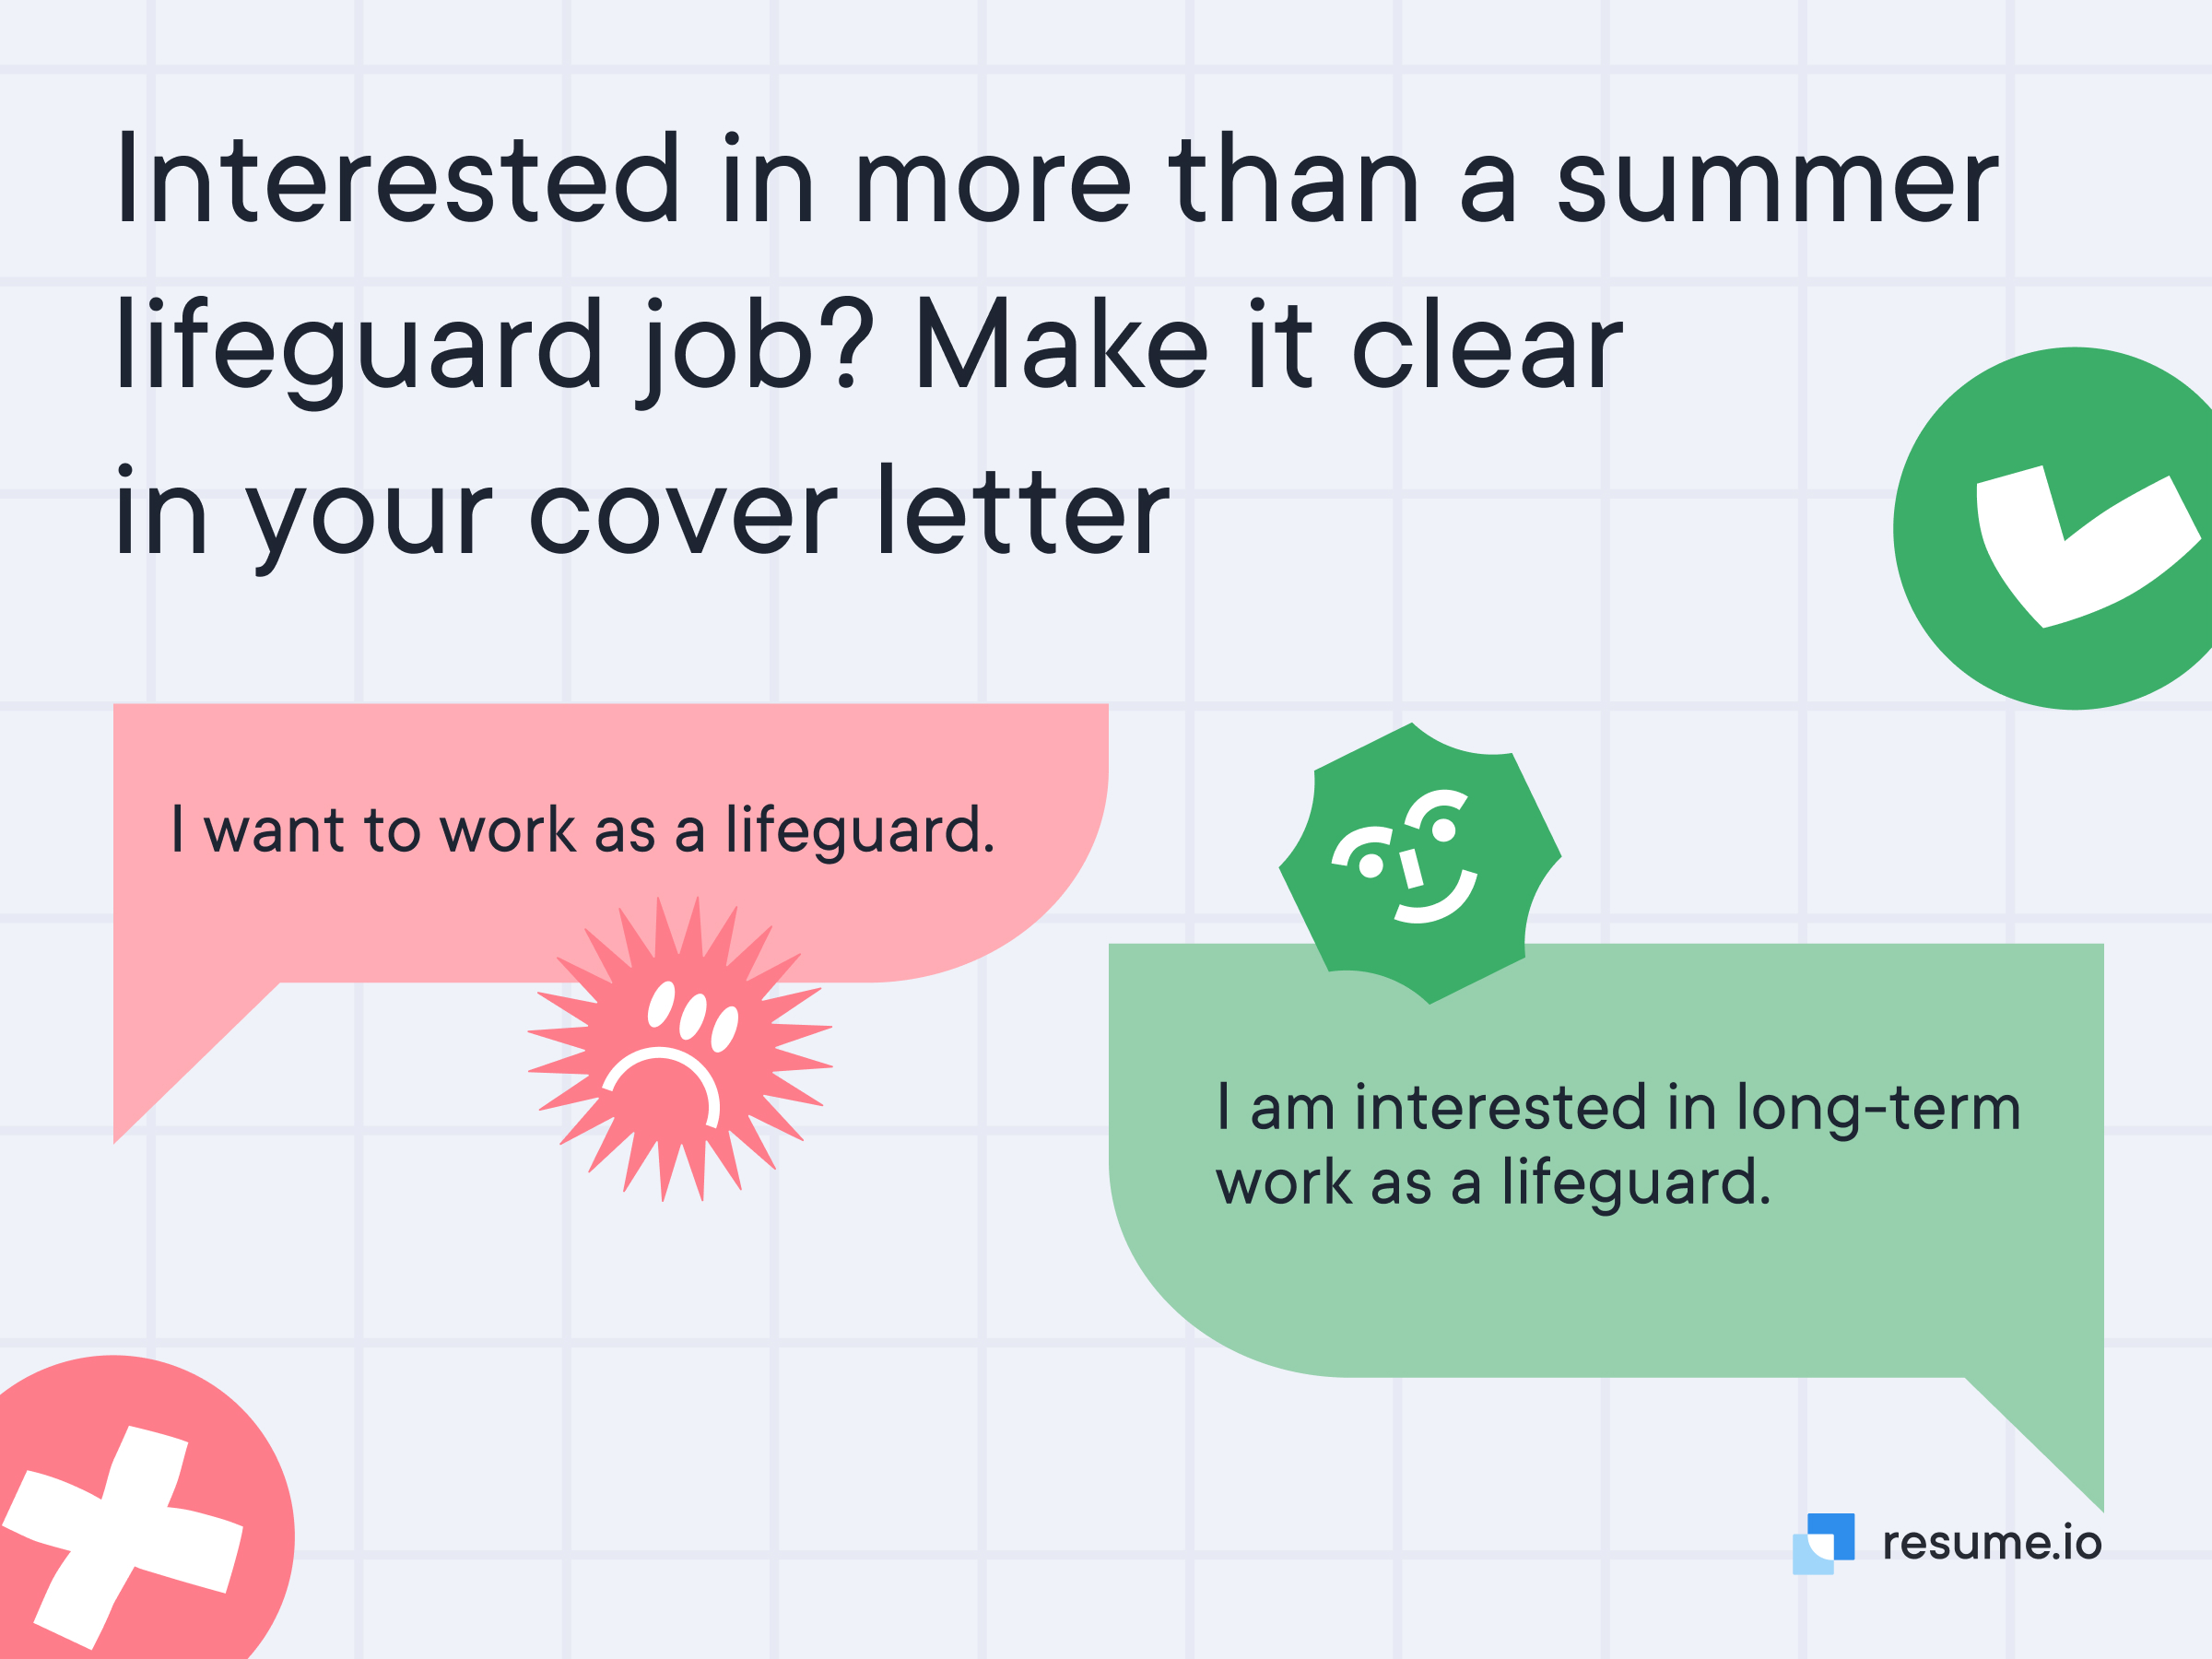 Interested in more than a summer lifeguard job? Make it clear in your cover letter: I am interested in long-term work as a lifeguard!